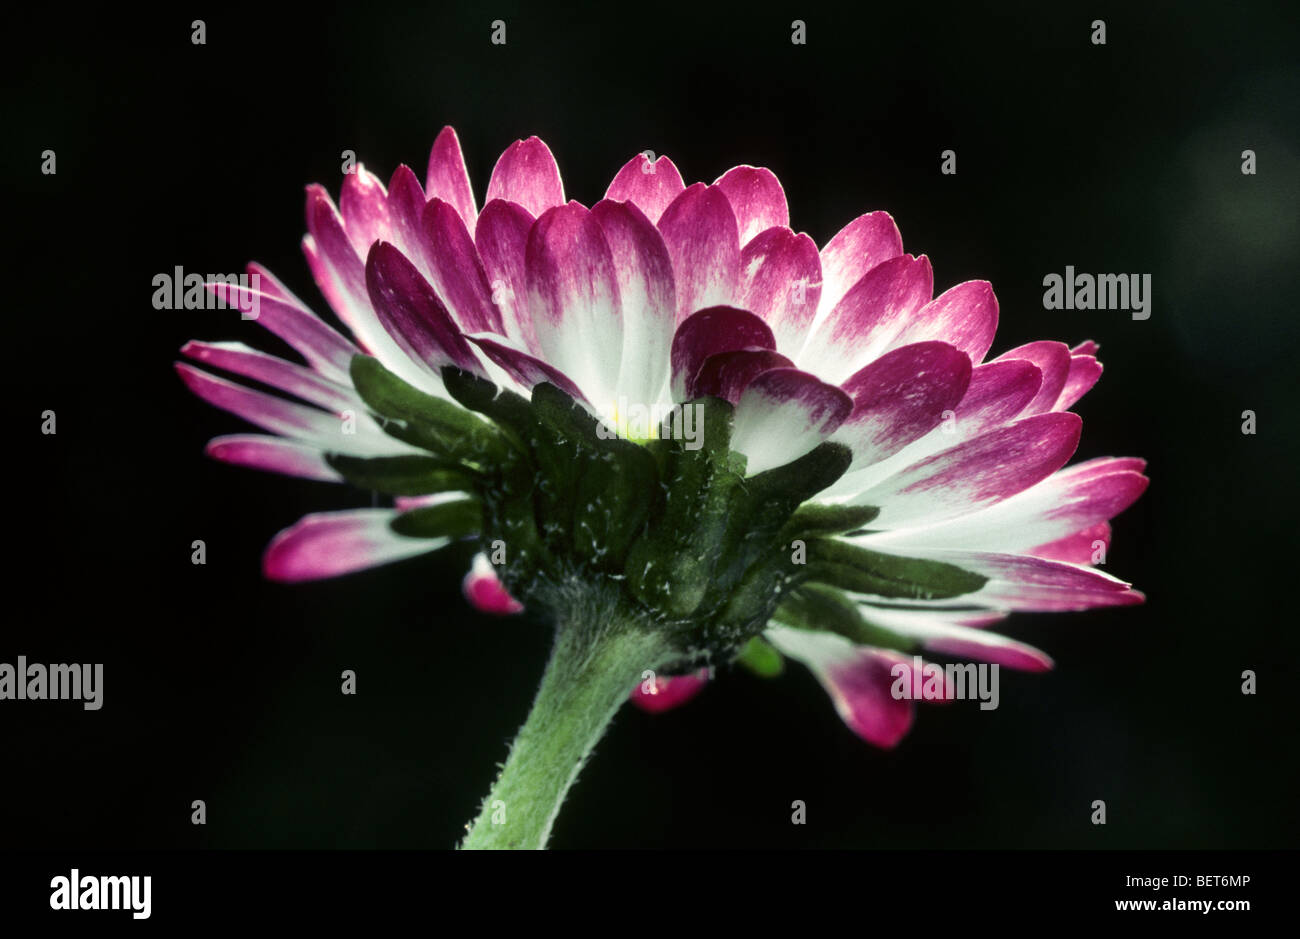 Common daisy / Lawn daisies / English daisy (Bellis perennis) in flower Stock Photo